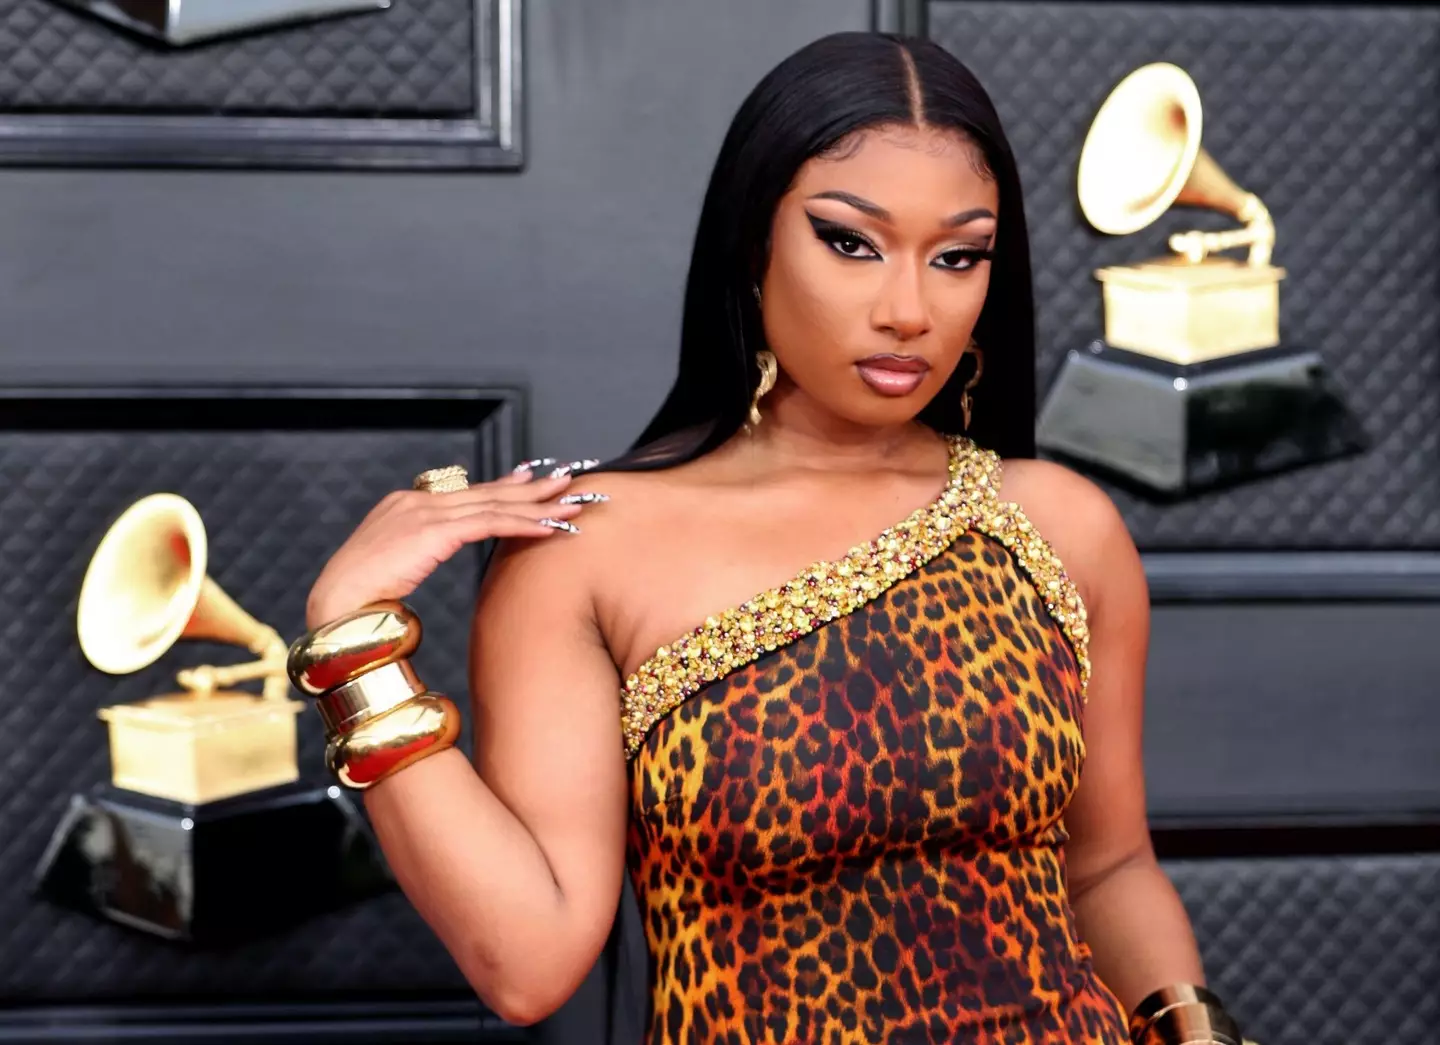 Megan Thee Stallion has accused Tory Lanez of shooting her in the foot.